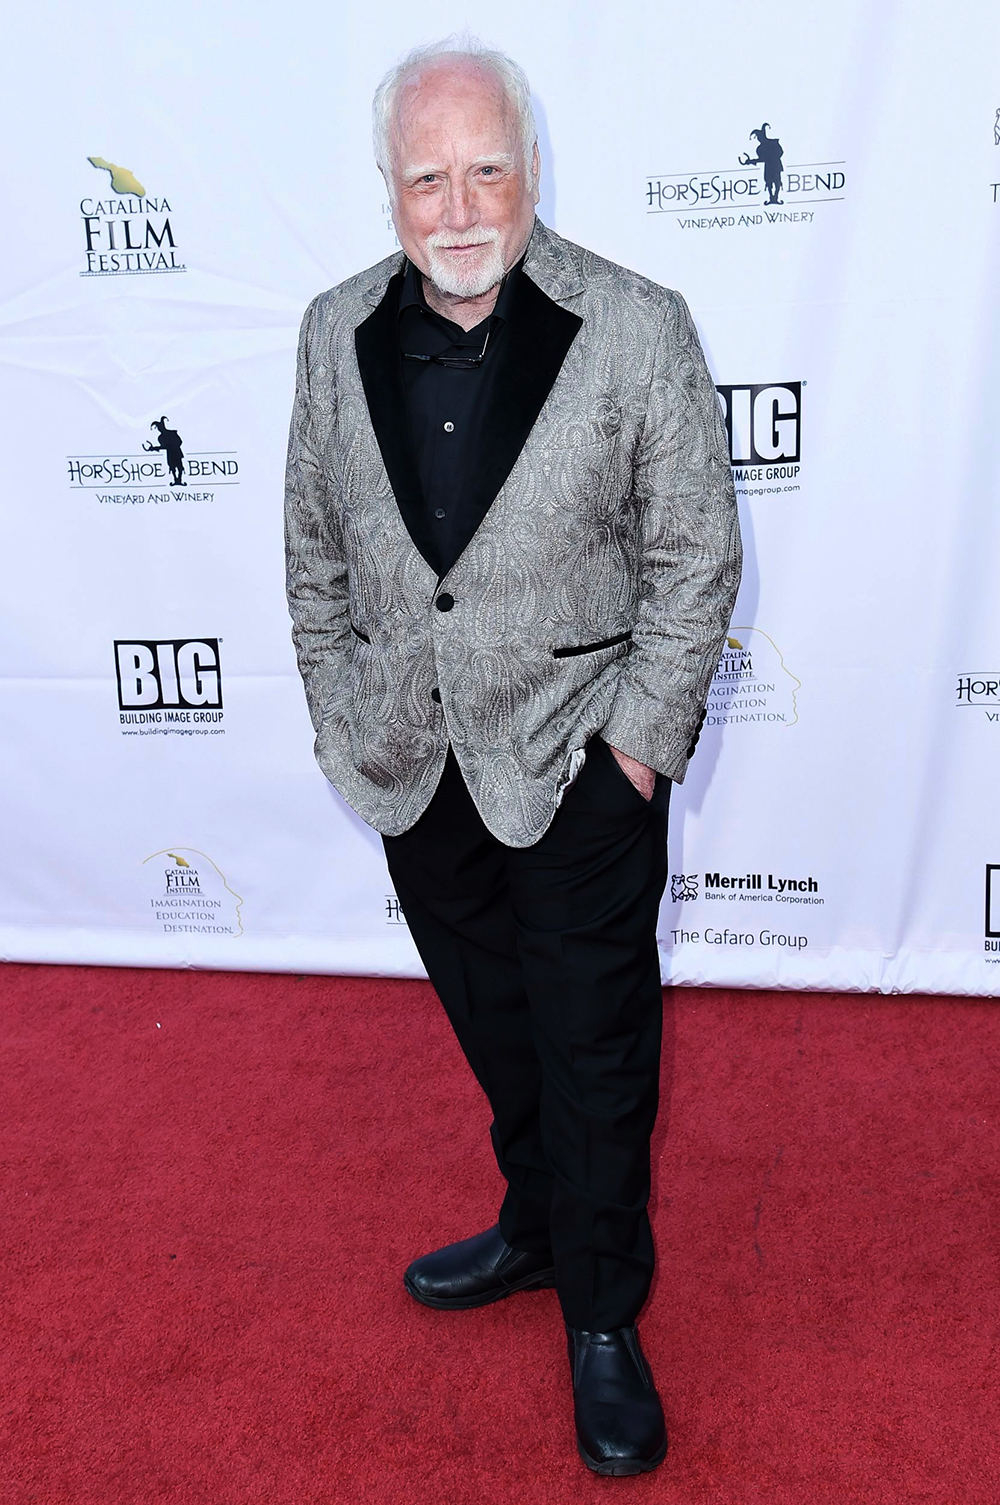 <p>Richard Dreyfuss on the red carpet at the Catalina Film Festival in Sept. 2018. For this event, the actor rocked a paisley-patterned grey suit, a black shirt, and black trousers. He completed the look with black dress shoes and rocked some silver locks.</p>